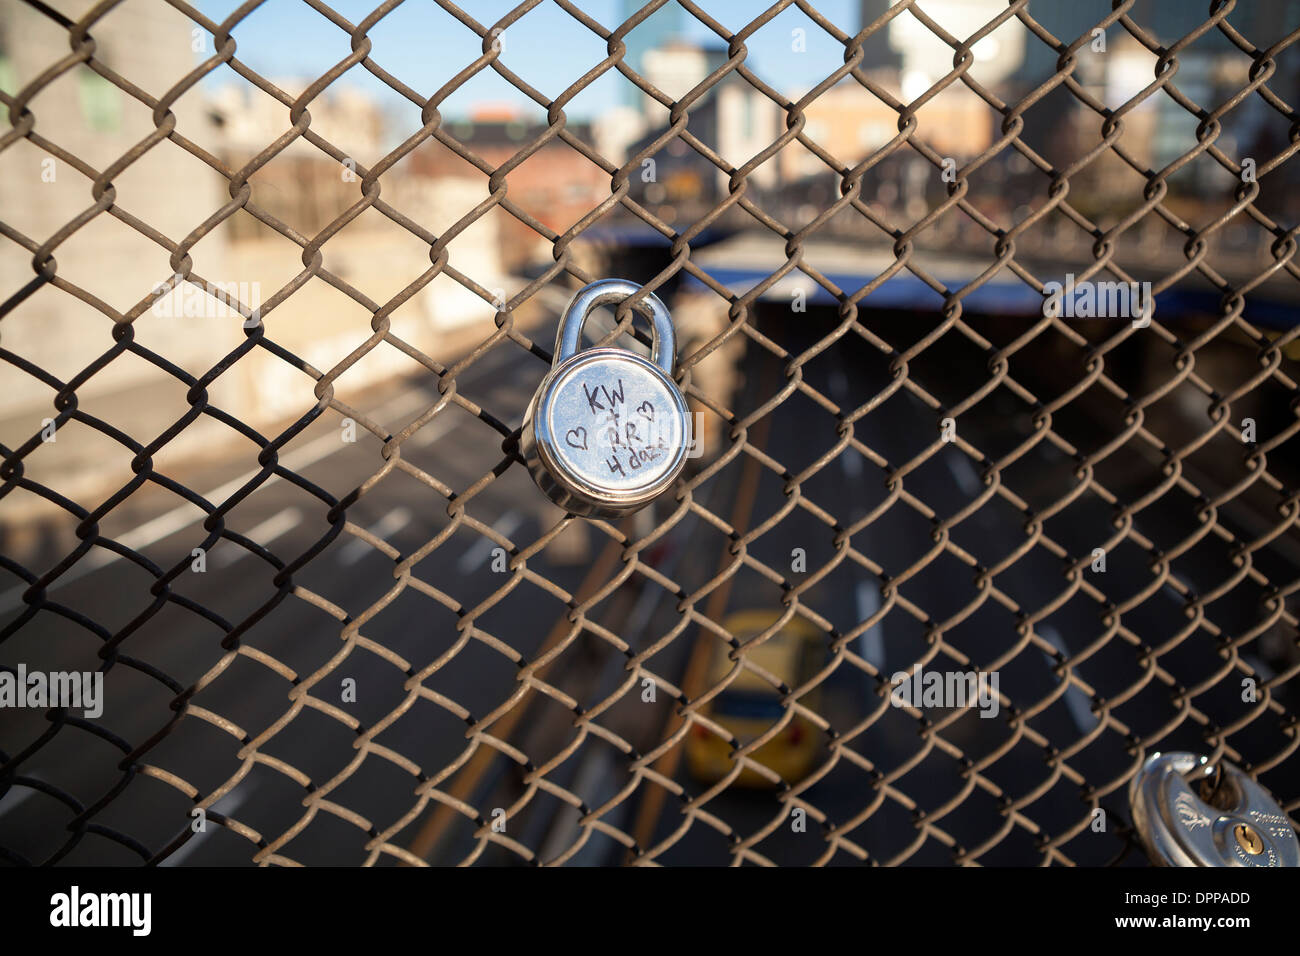 A love lock with two people's initials and heart symbols is attached to a fence in Boston. Stock Photo